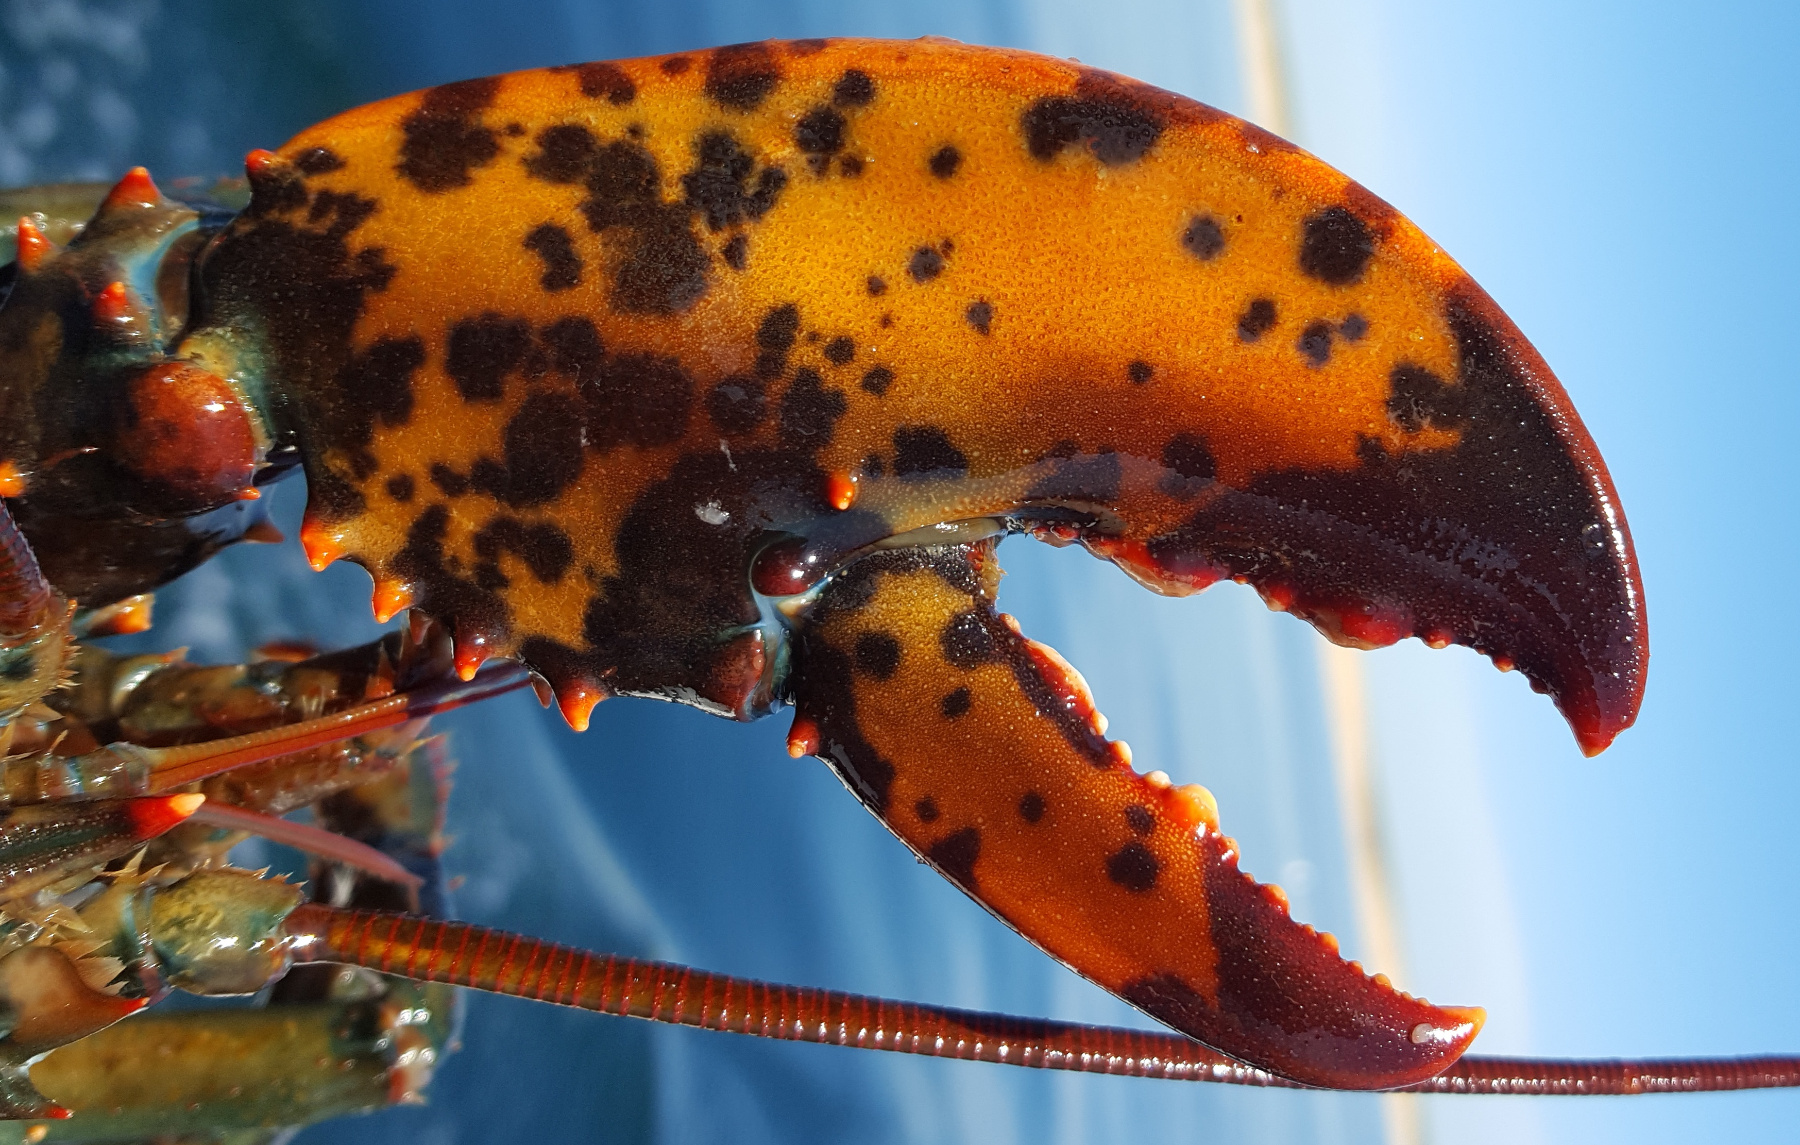 Lobster claw of unusual color, orange with black spots